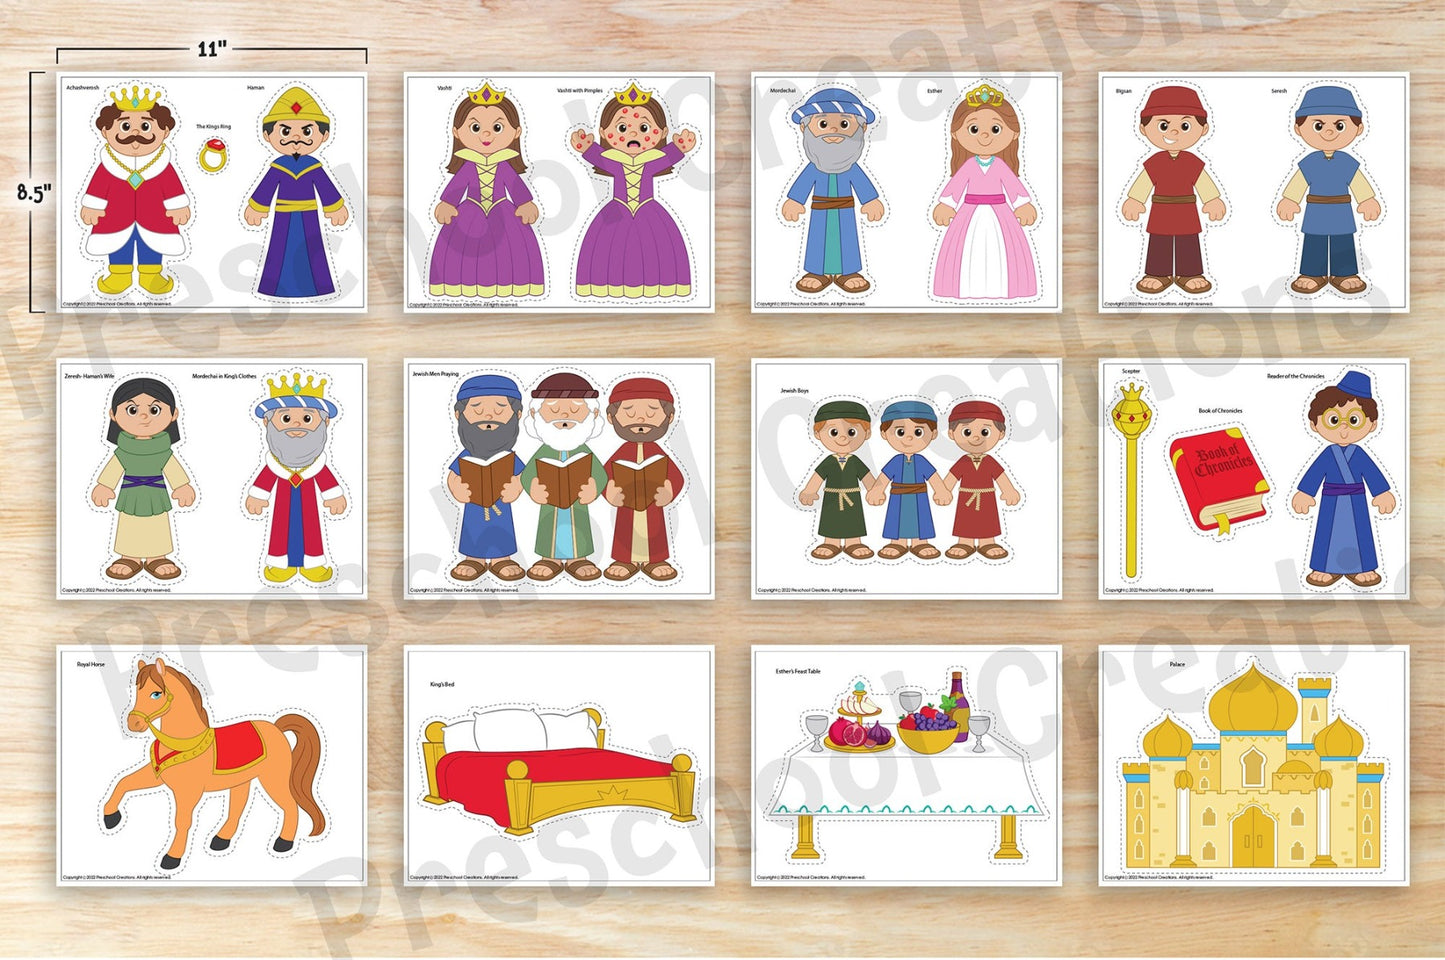 20 Full color pages of adorable Puppets and Props/Bulletin Board Décor for Purim.  What's included?  Achashveirosh Vashti Esther Haman Mordechai Bigsan and Seresh Royal horse Customs and mitzvot of Purim- megillah, mishloach manot, matanot la'evyonim and purim feast, hamantashen, graggers and costumes